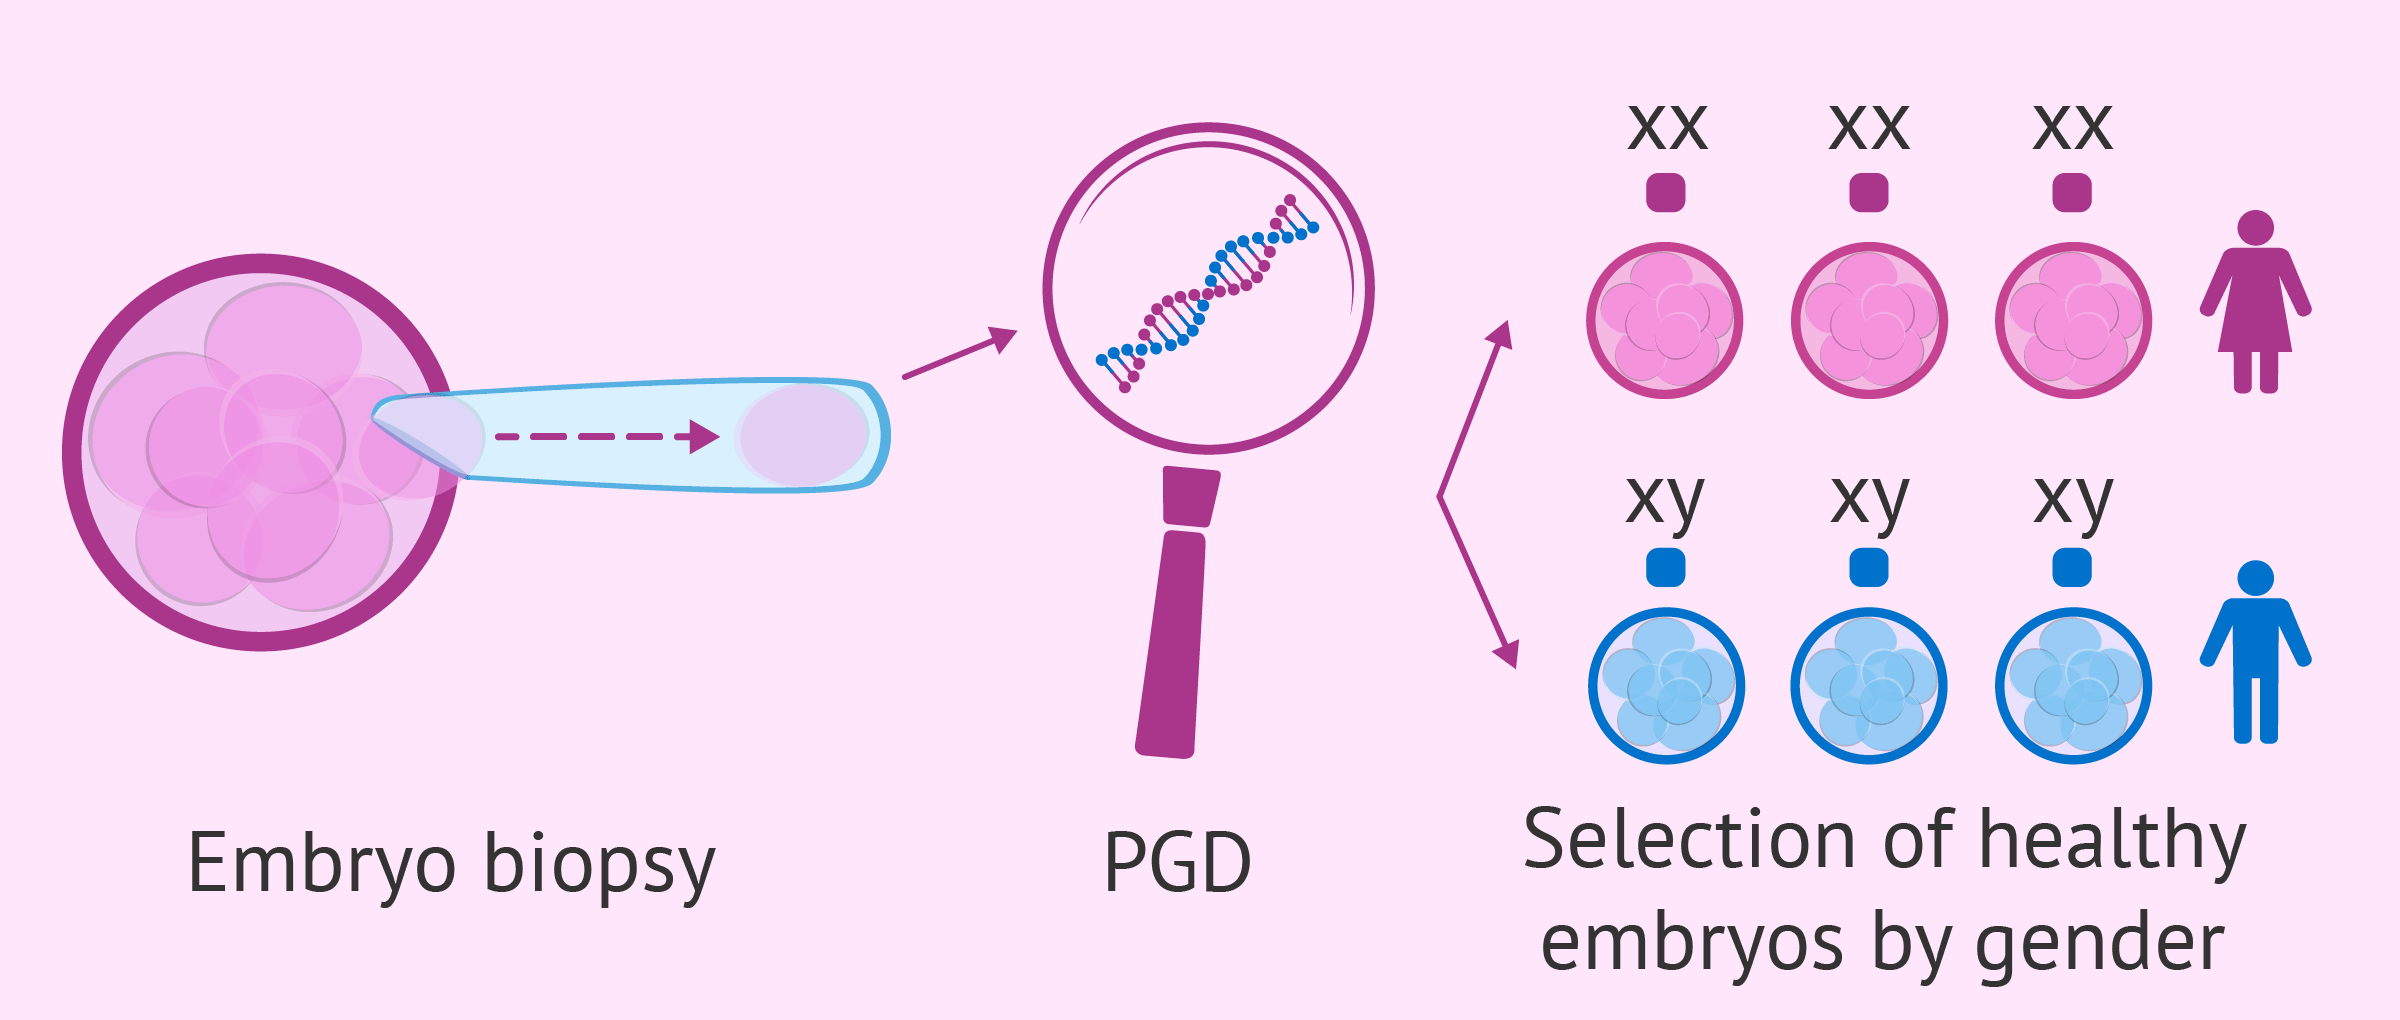 Process of PGD for gender selection